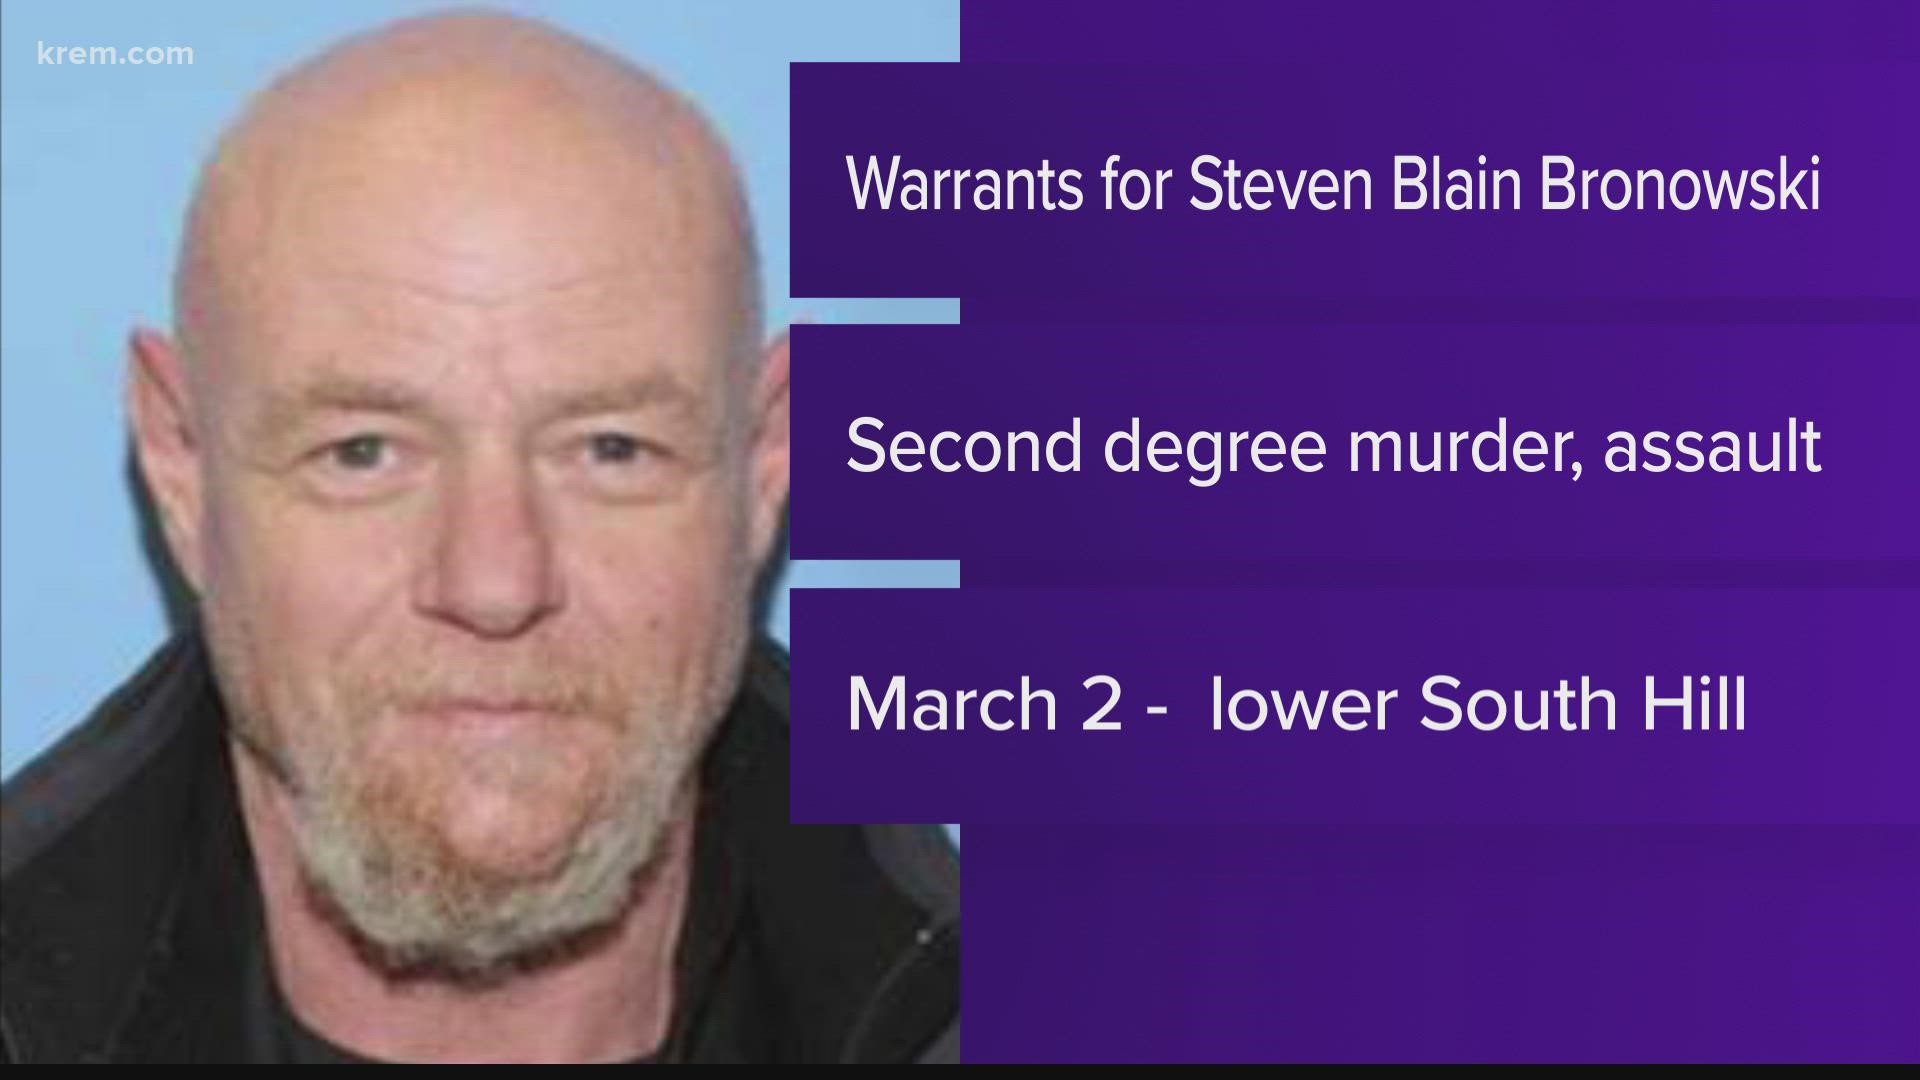 The suspect, 56 year-old Steven Blain Bronowski, currently has arrest warrants for second degree murder and first degree assault.